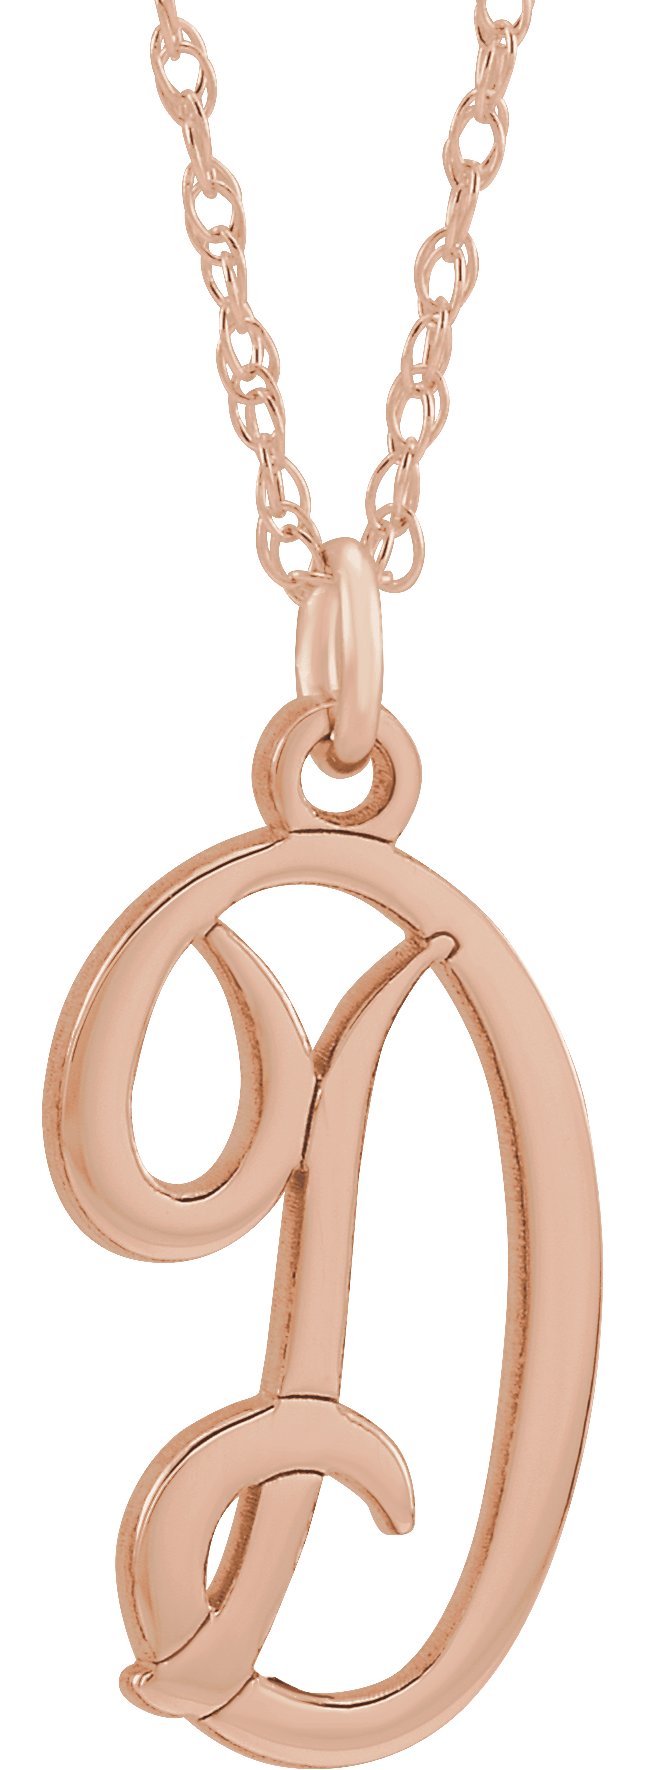 14K Rose Gold-Plated Sterling Silver Script Initial D 16-18" Necklace